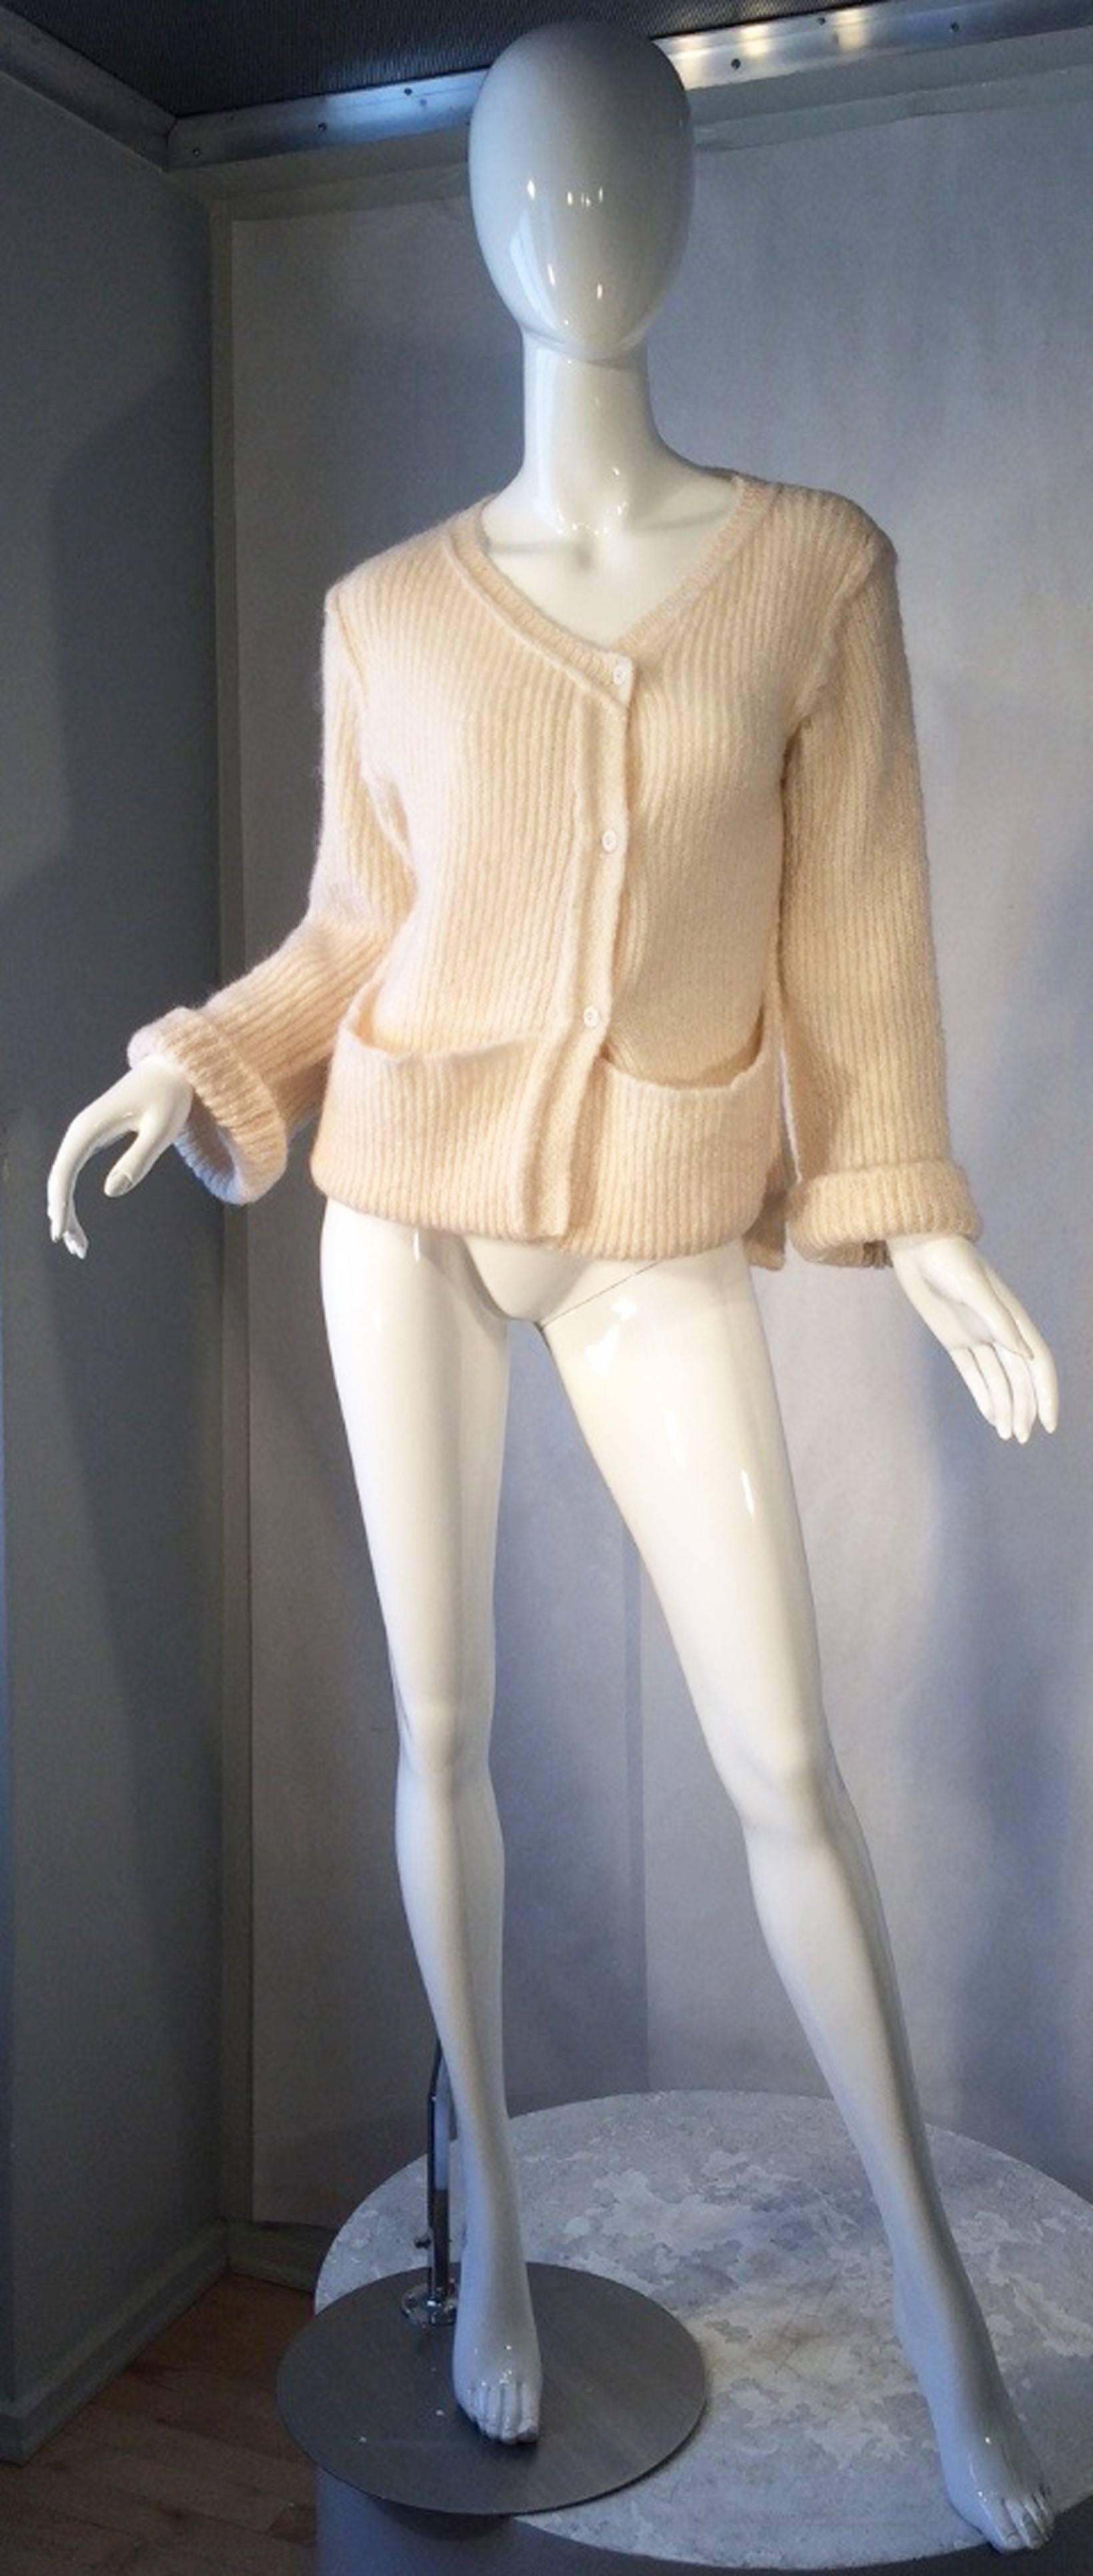 A fine and rare vintage Sonia Rykiel cardigan sweater. Early example of the designers now iconic knit designs features a asymmetrical hemline, open front pockets, turn-up cuffs and button front closures. Ivory cable knit wool item made in Italy for